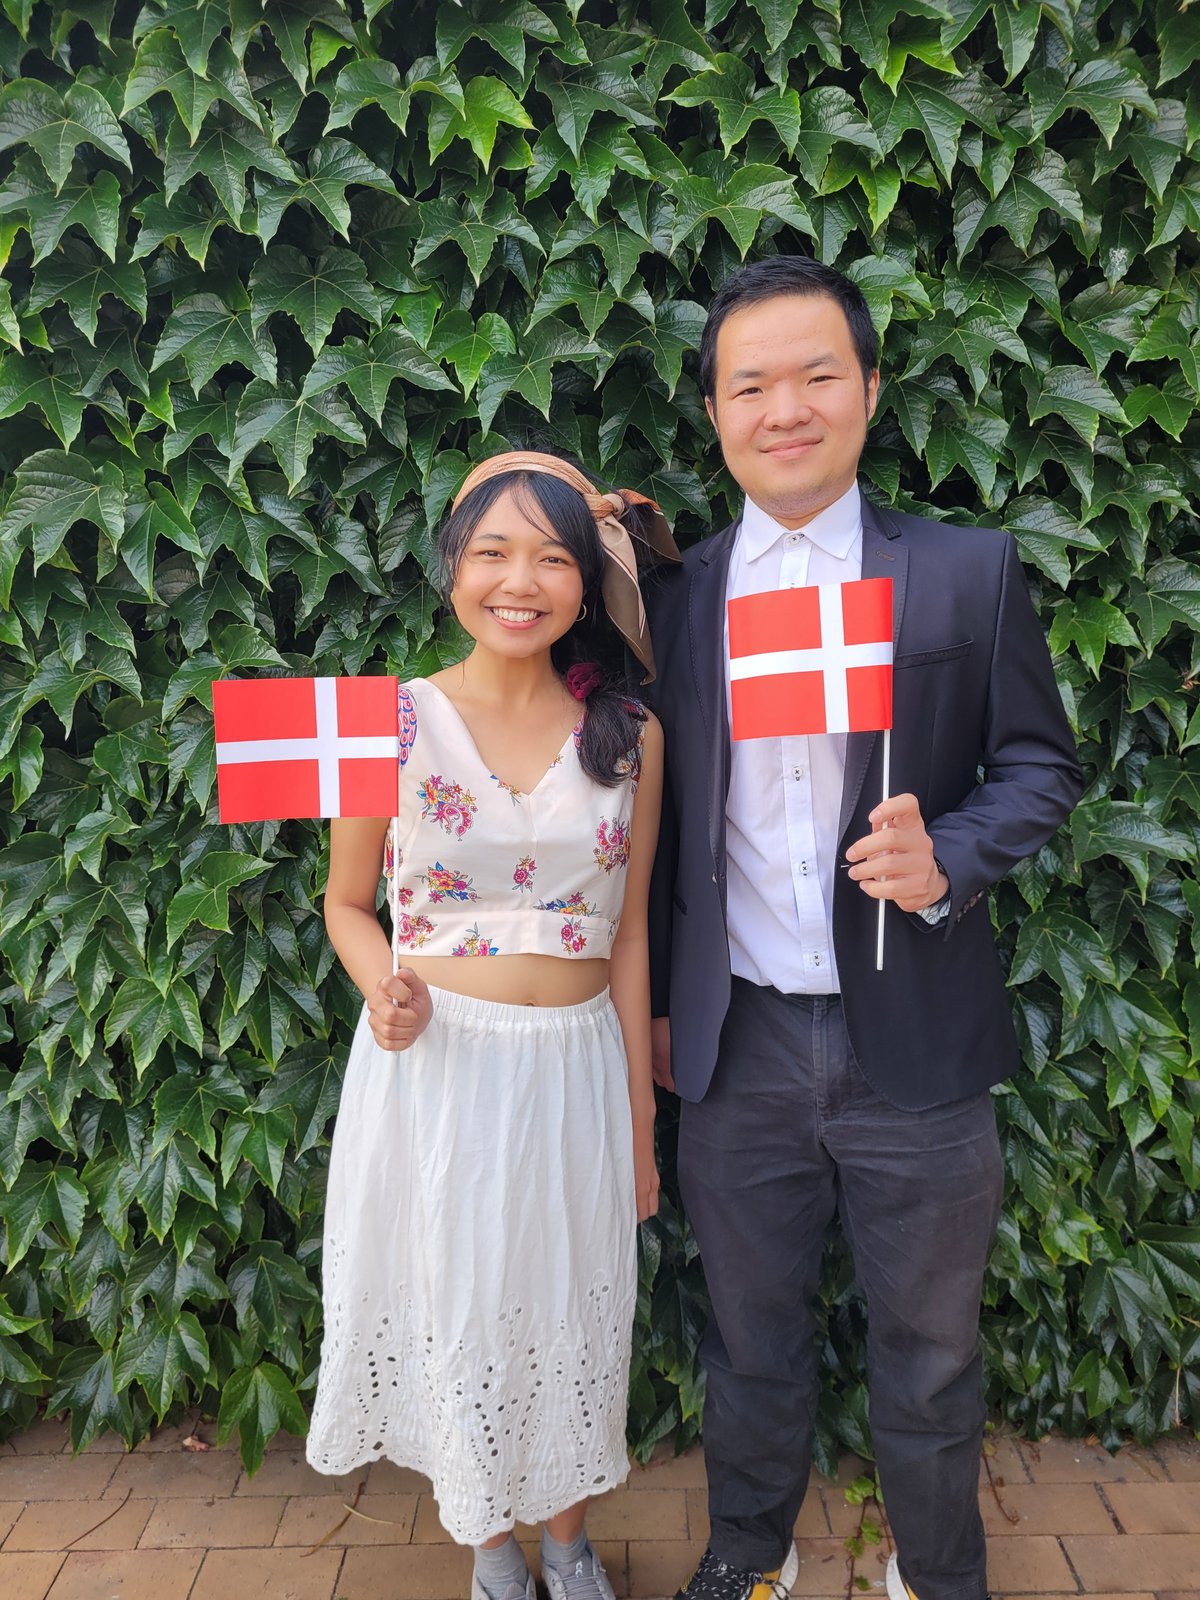 Two indonesian students holding Danish flags